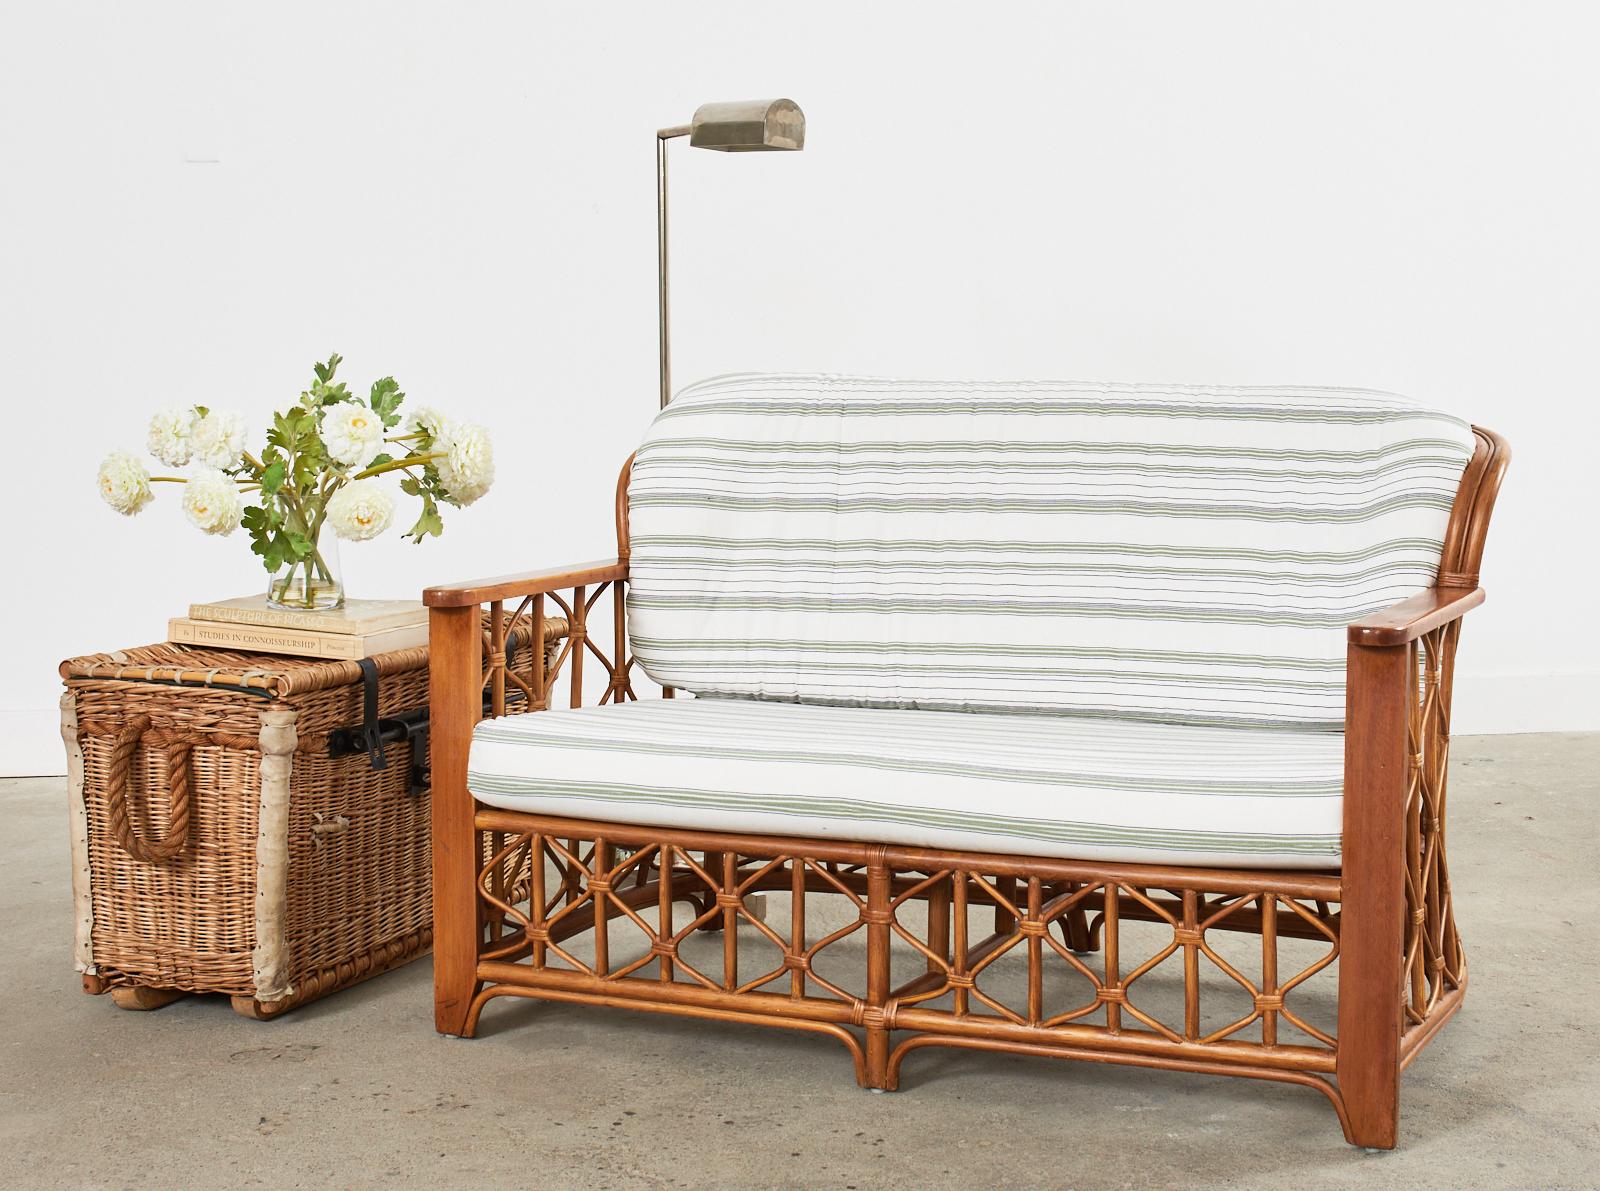 Stylish mid-century modern Italian rattan and wicker settee or love seat hand-crafted in the organic modern coastal style. The settee features a bent rattan and wood frame with decorative geometric lattice in an open fretwork design. The frame has a